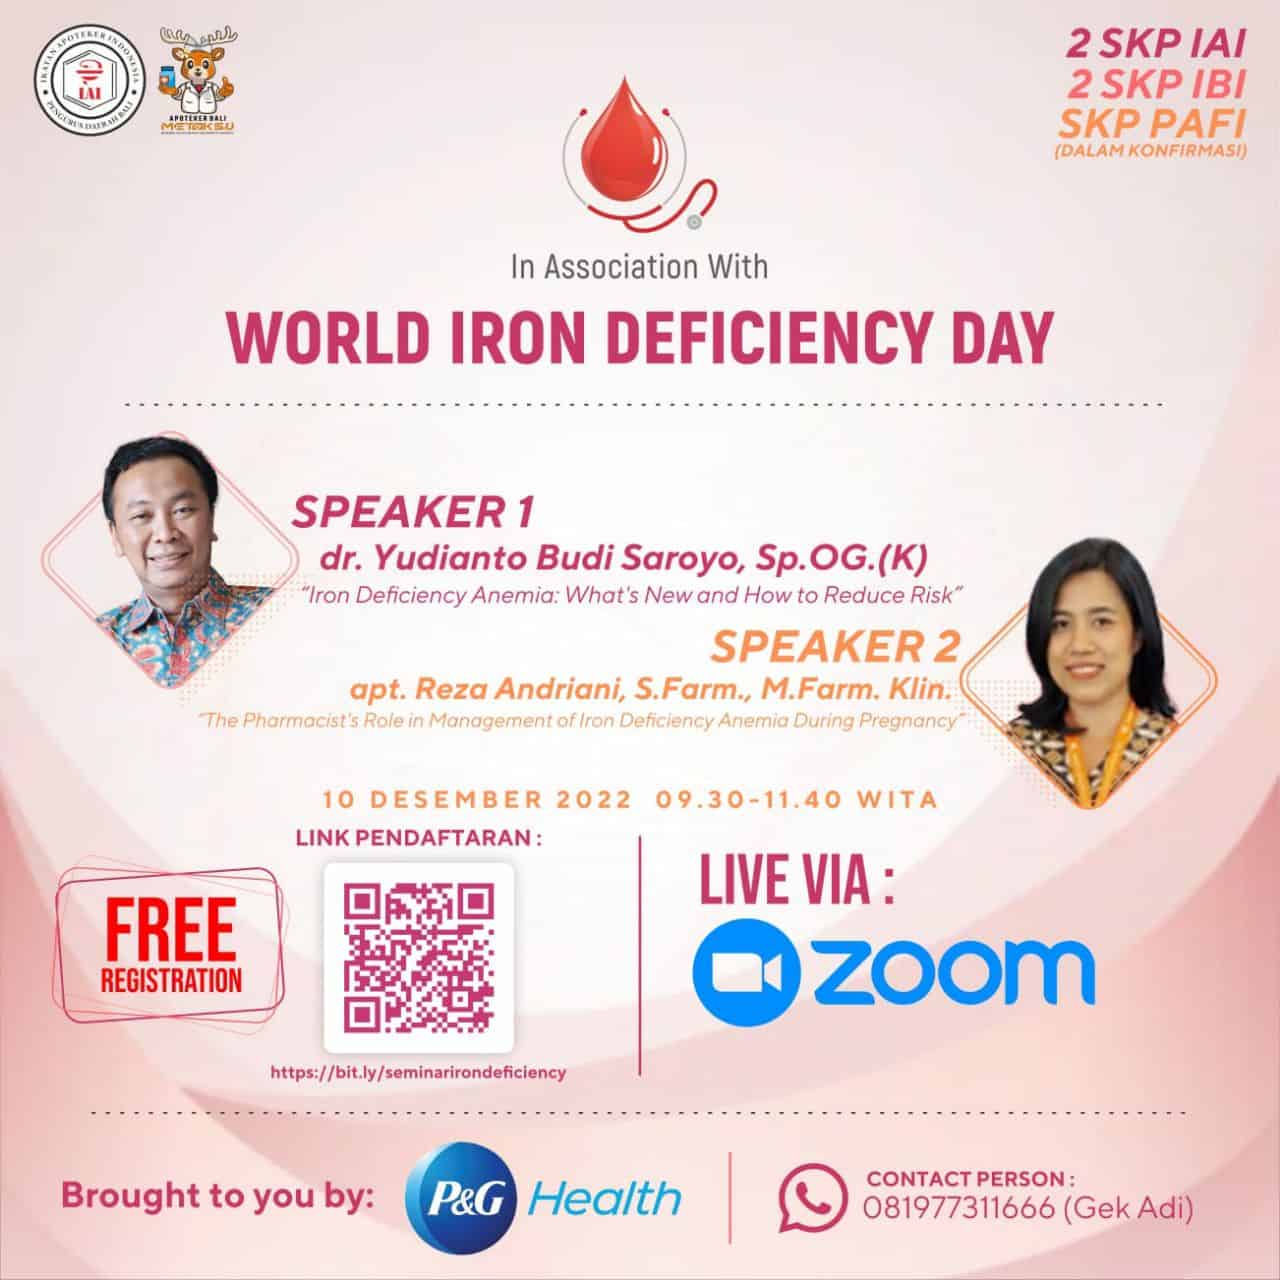 World Iron Deficiency Day 2022